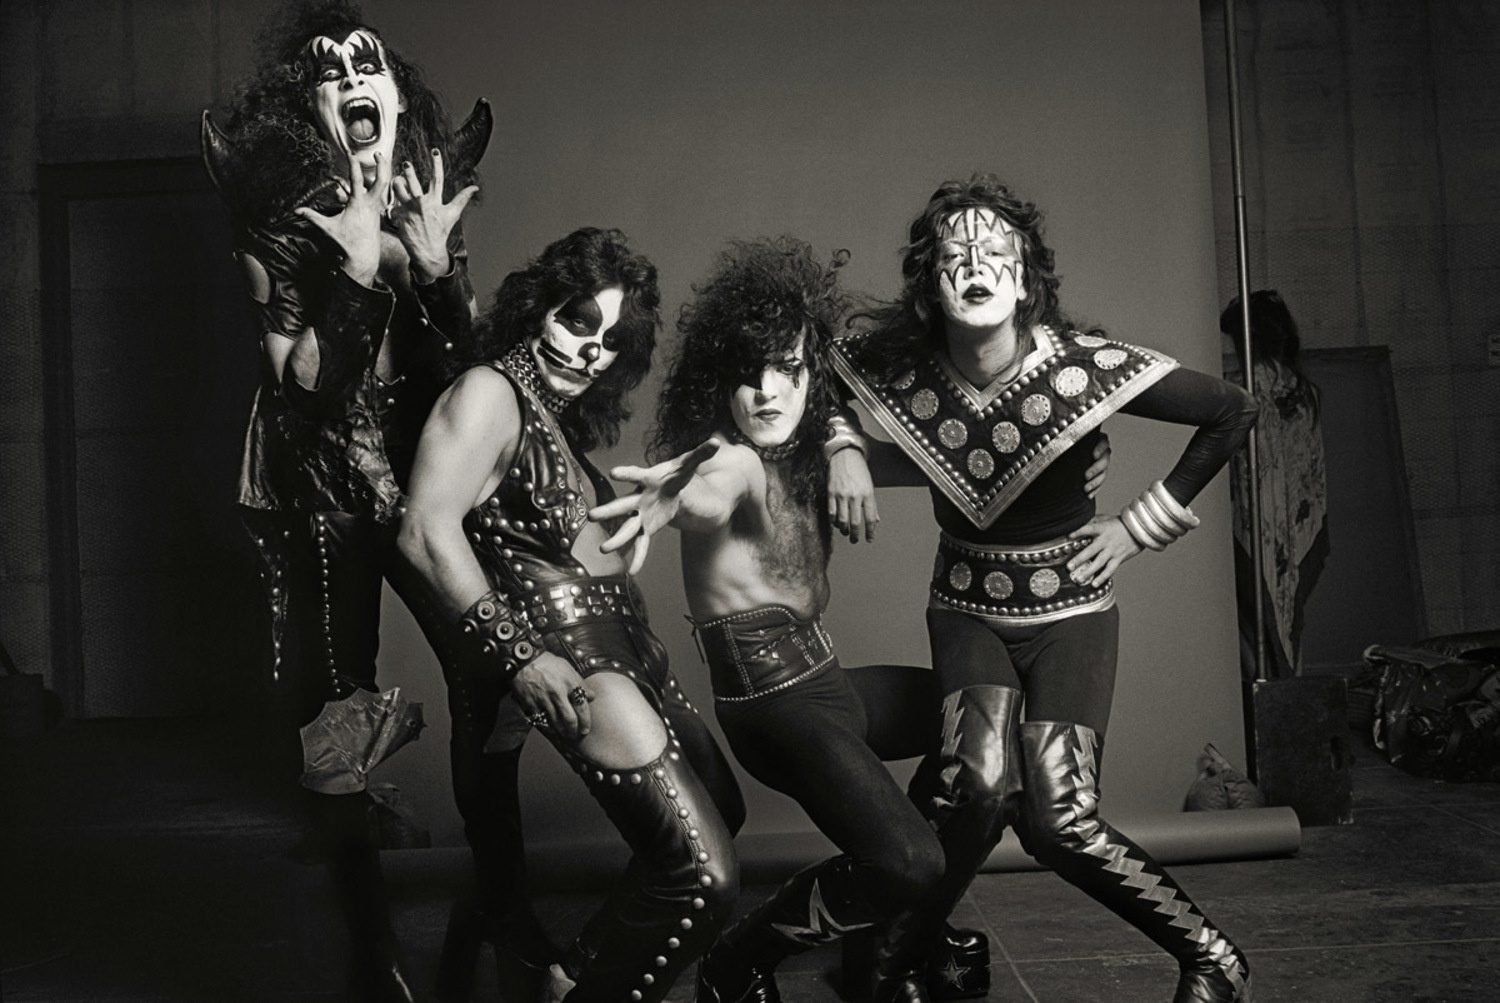 KISS, Los Angeles 1974 “Girl in Background”